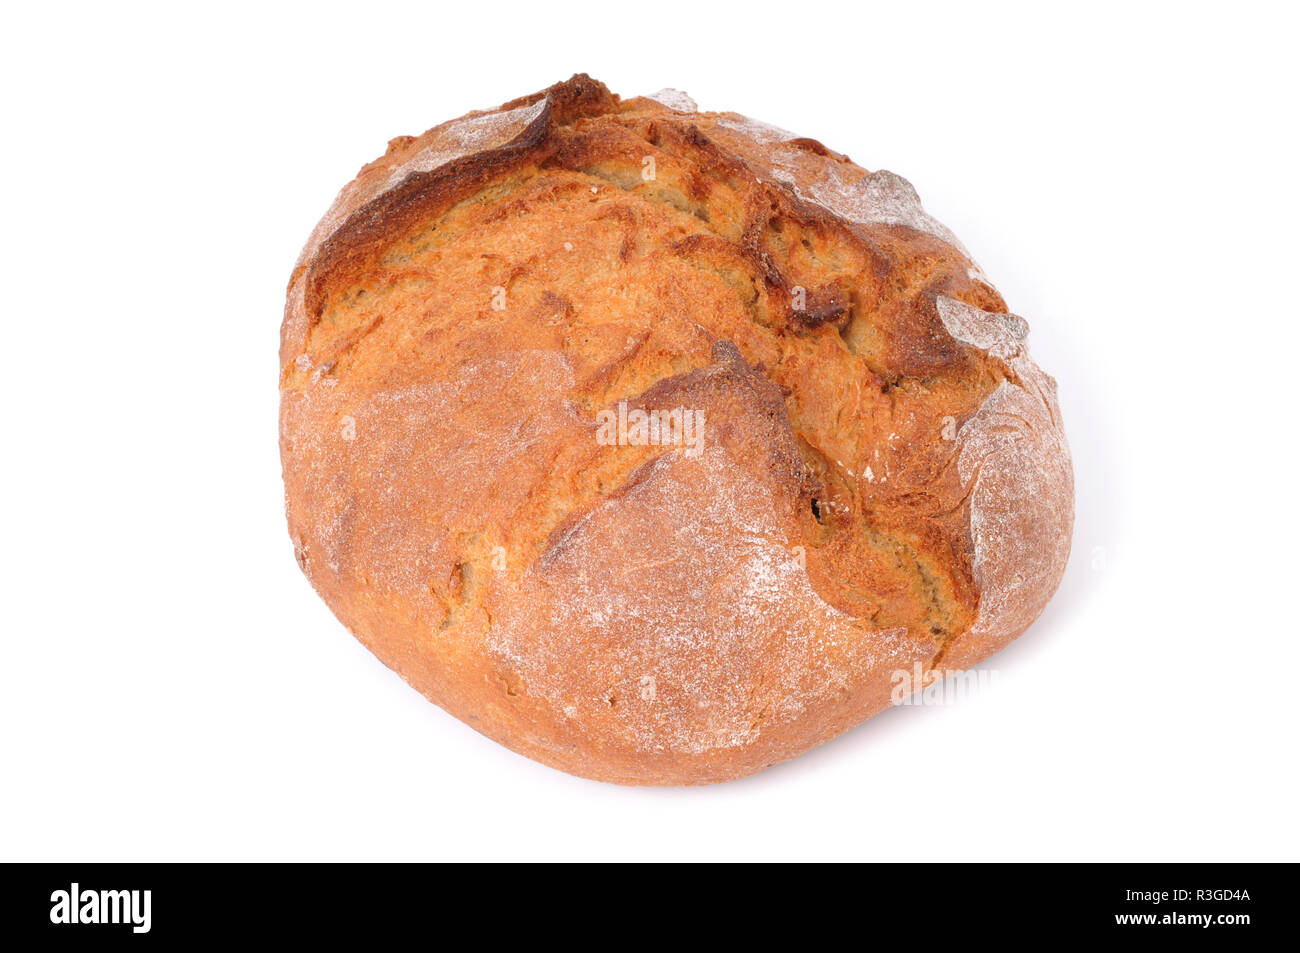 white beer bread / wheat beer bread Stock Photo